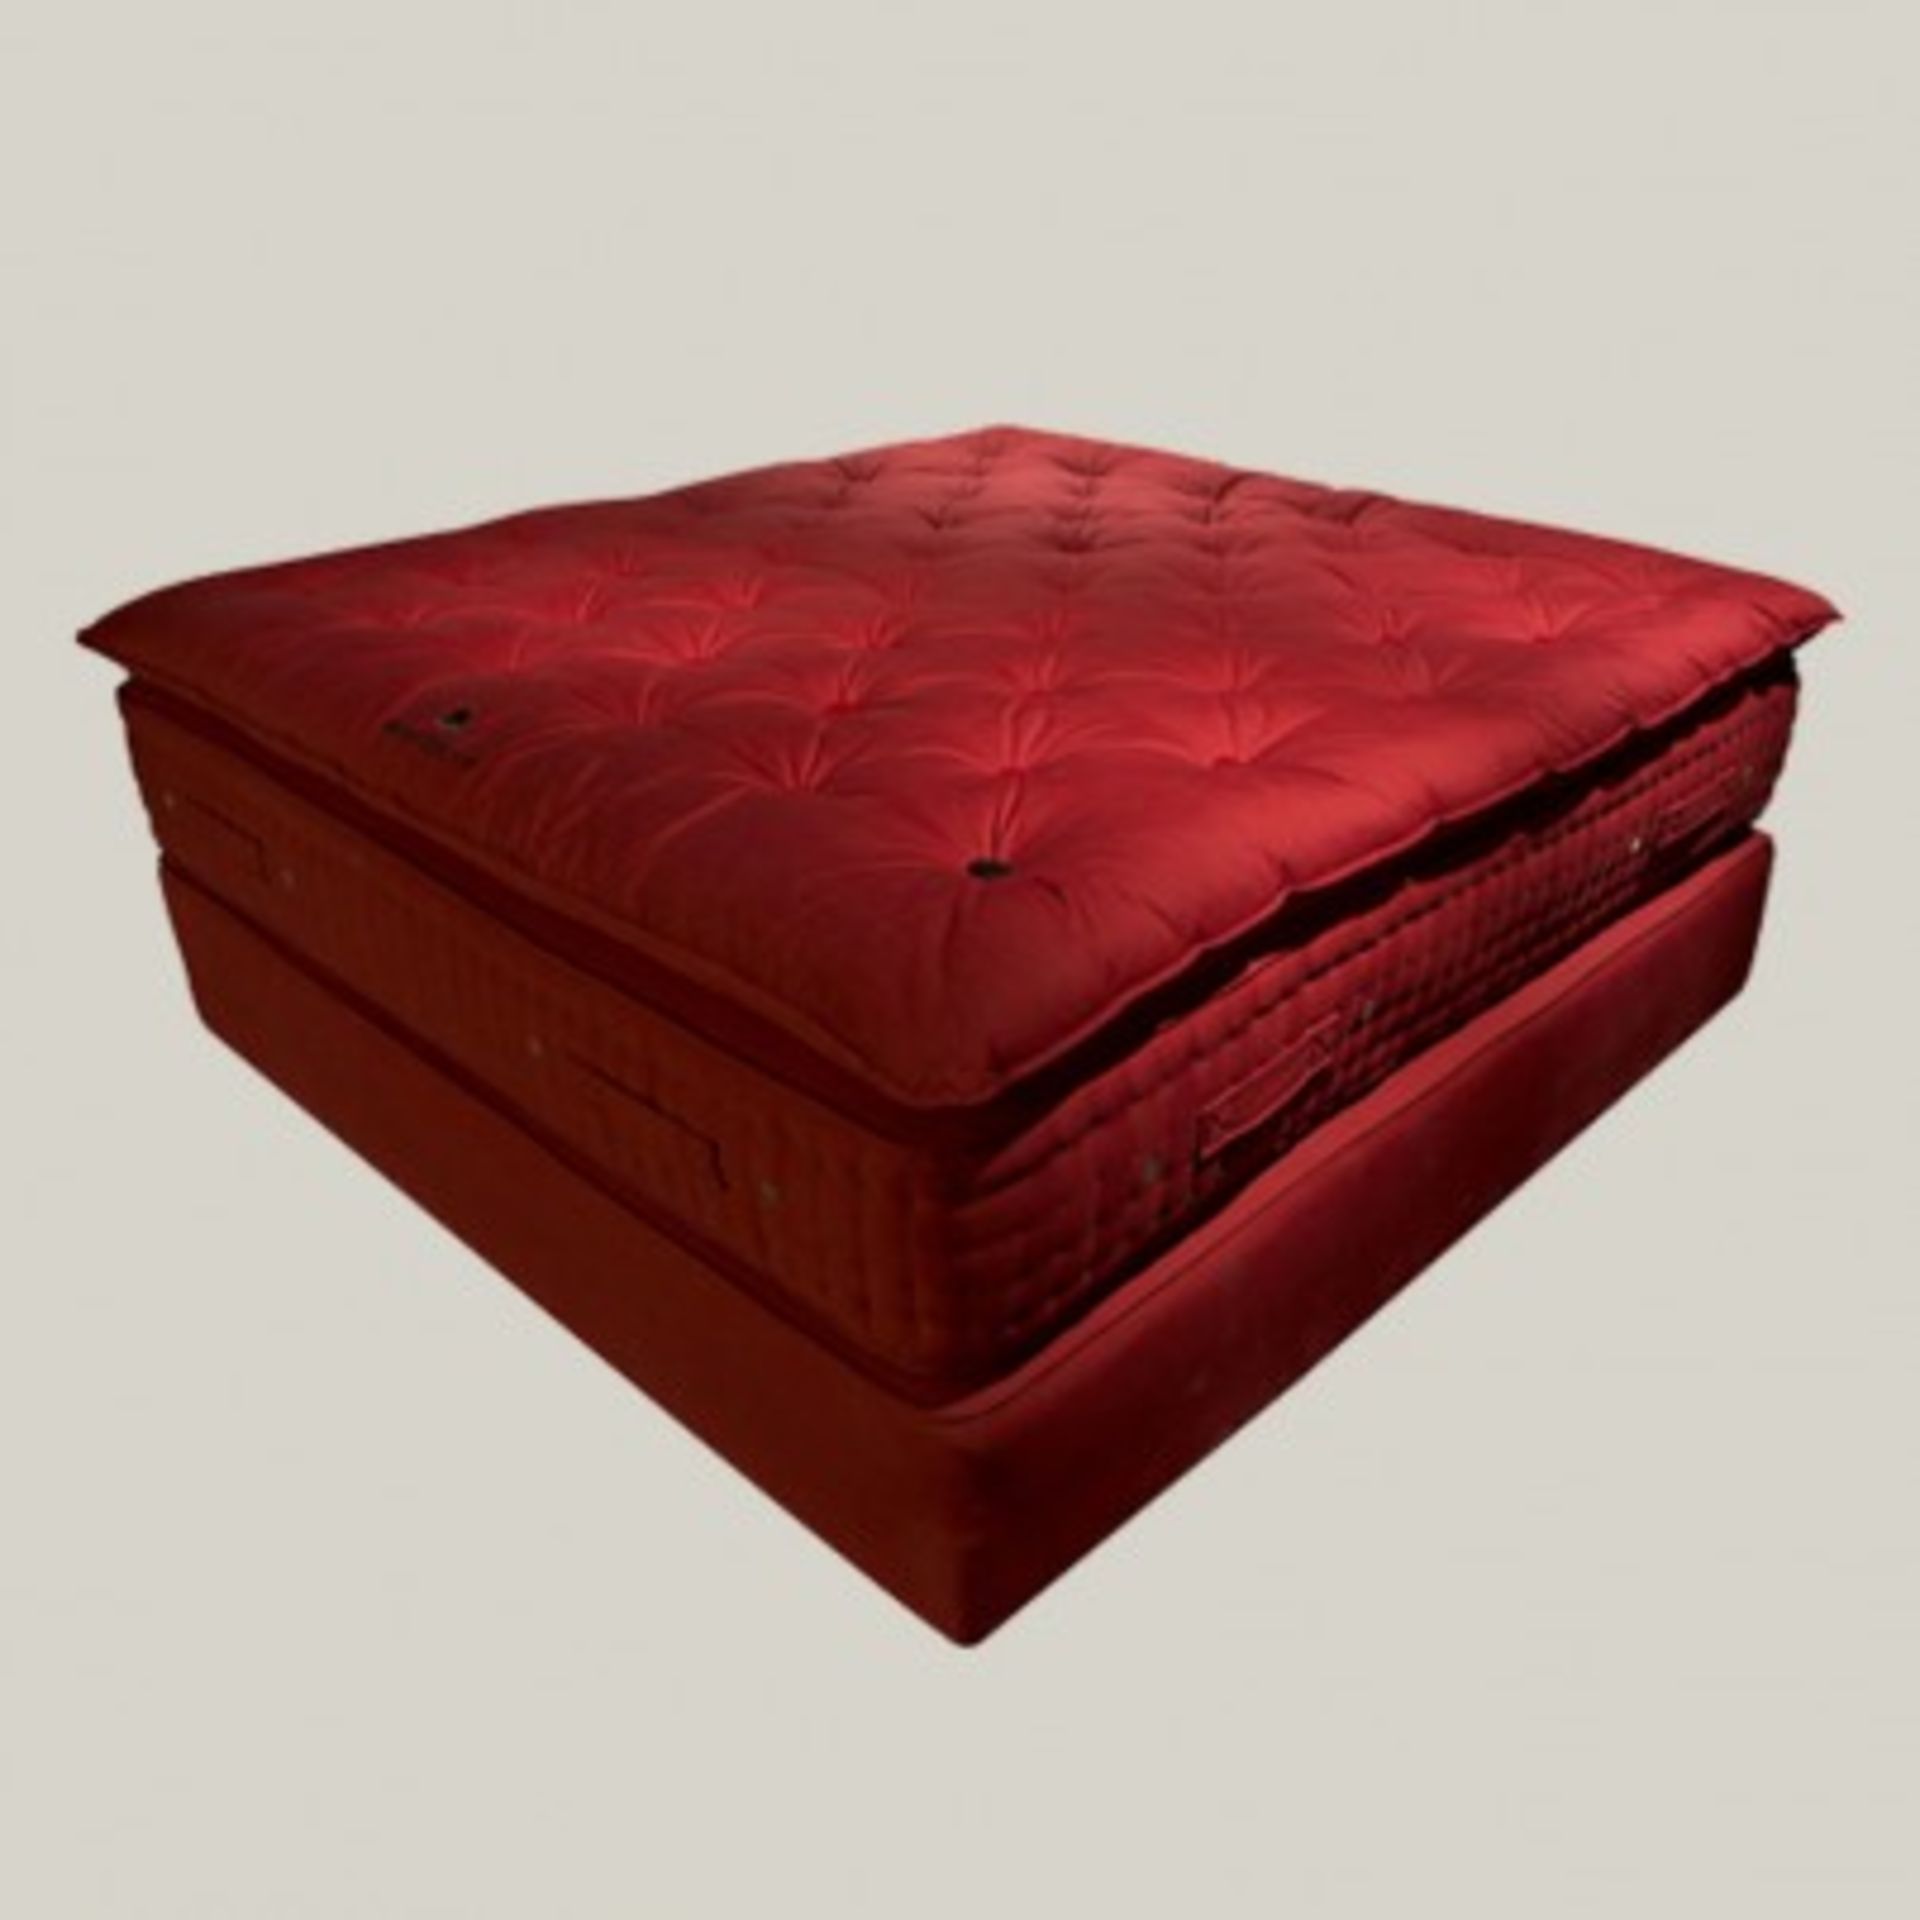 The Brigadier Mattress UK The Most Popular Bed Of The Perpetual Collection The Brigadier Is Designed